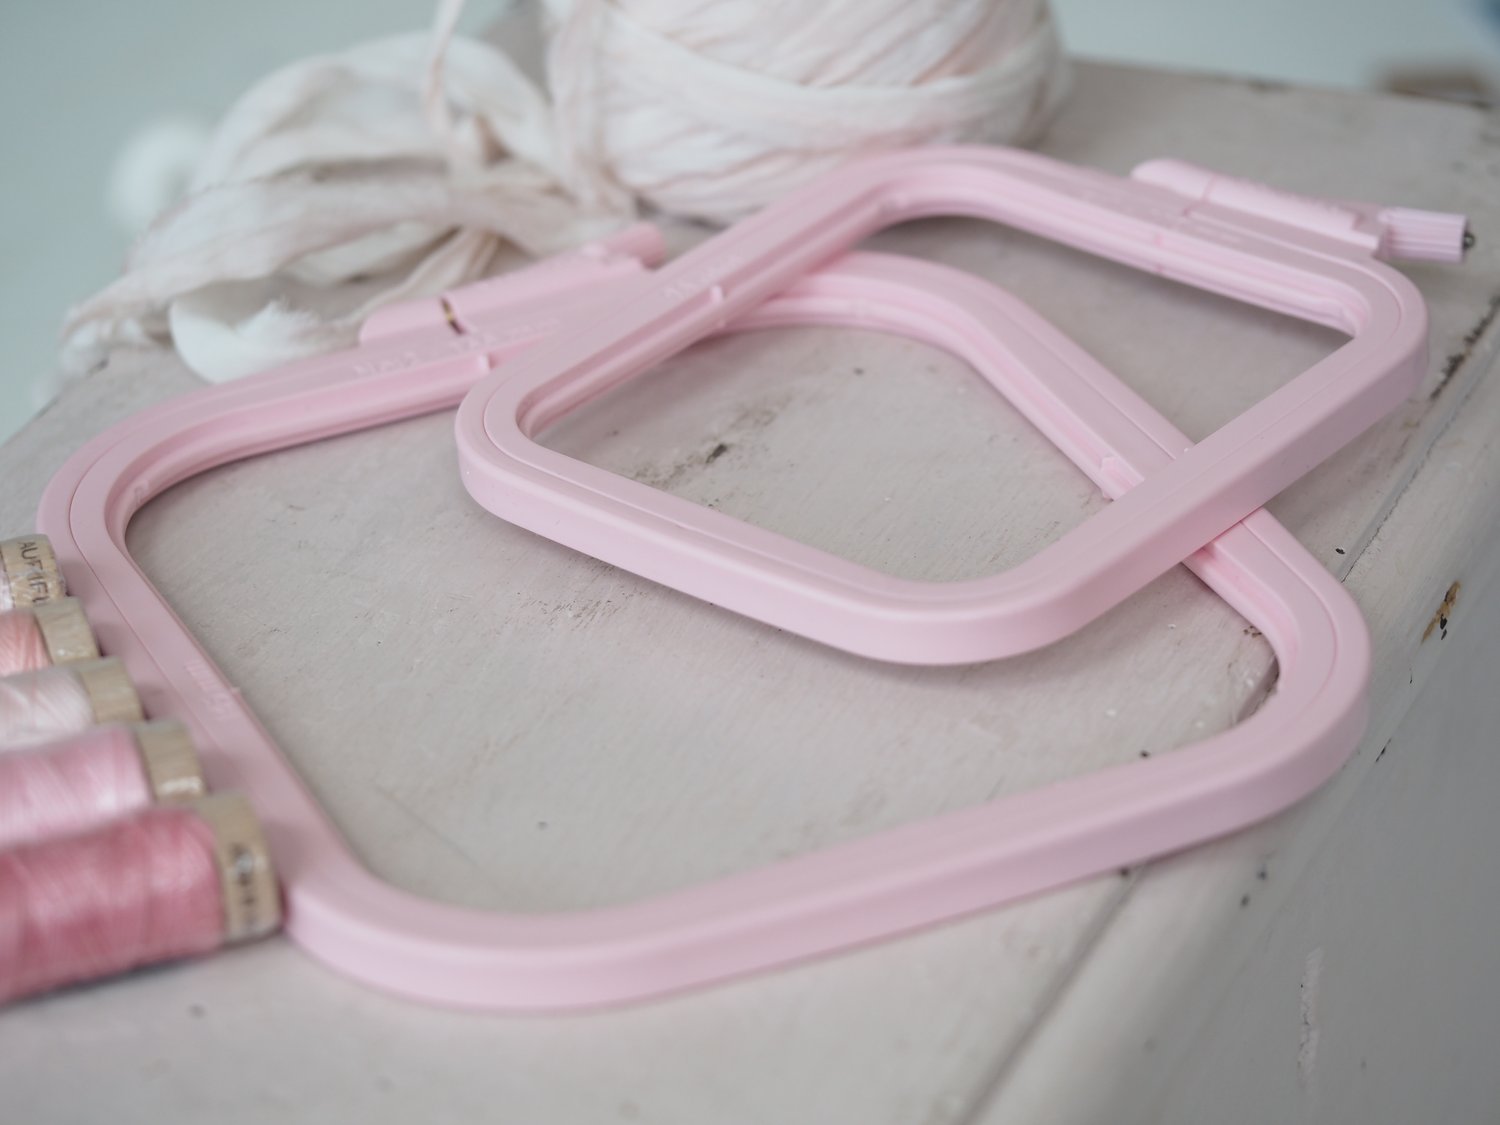 Nurge Square Plastic Hoop Pink – Colour and Cotton